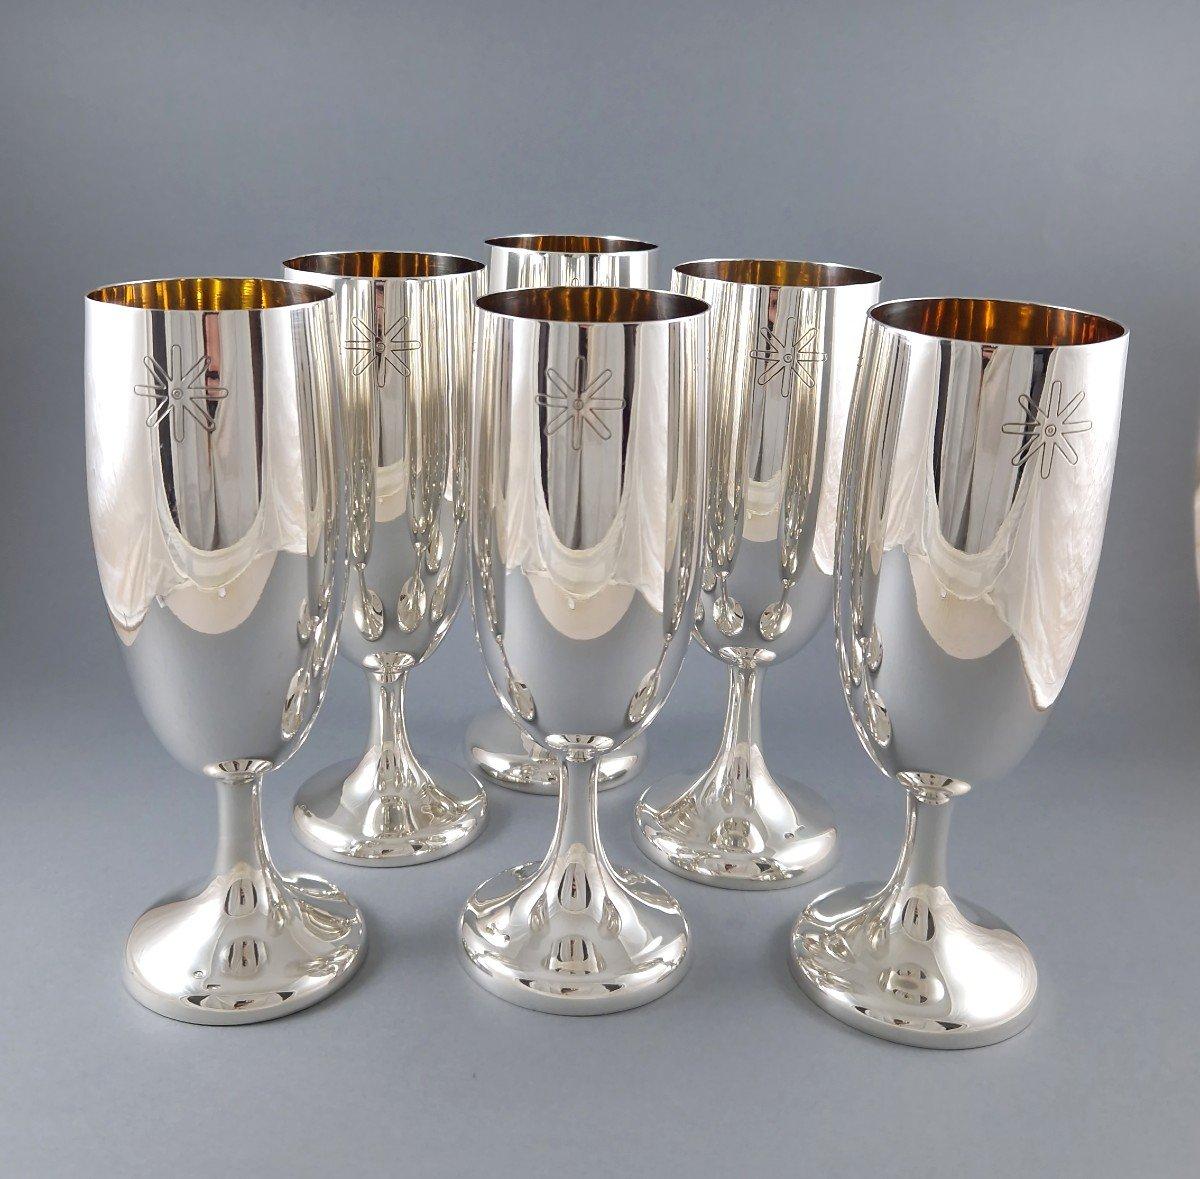 Series of six glasses in sterling silver and gilt 
Silver hallmark 800 
Height: 18 cm 
Weight: 1042 grams